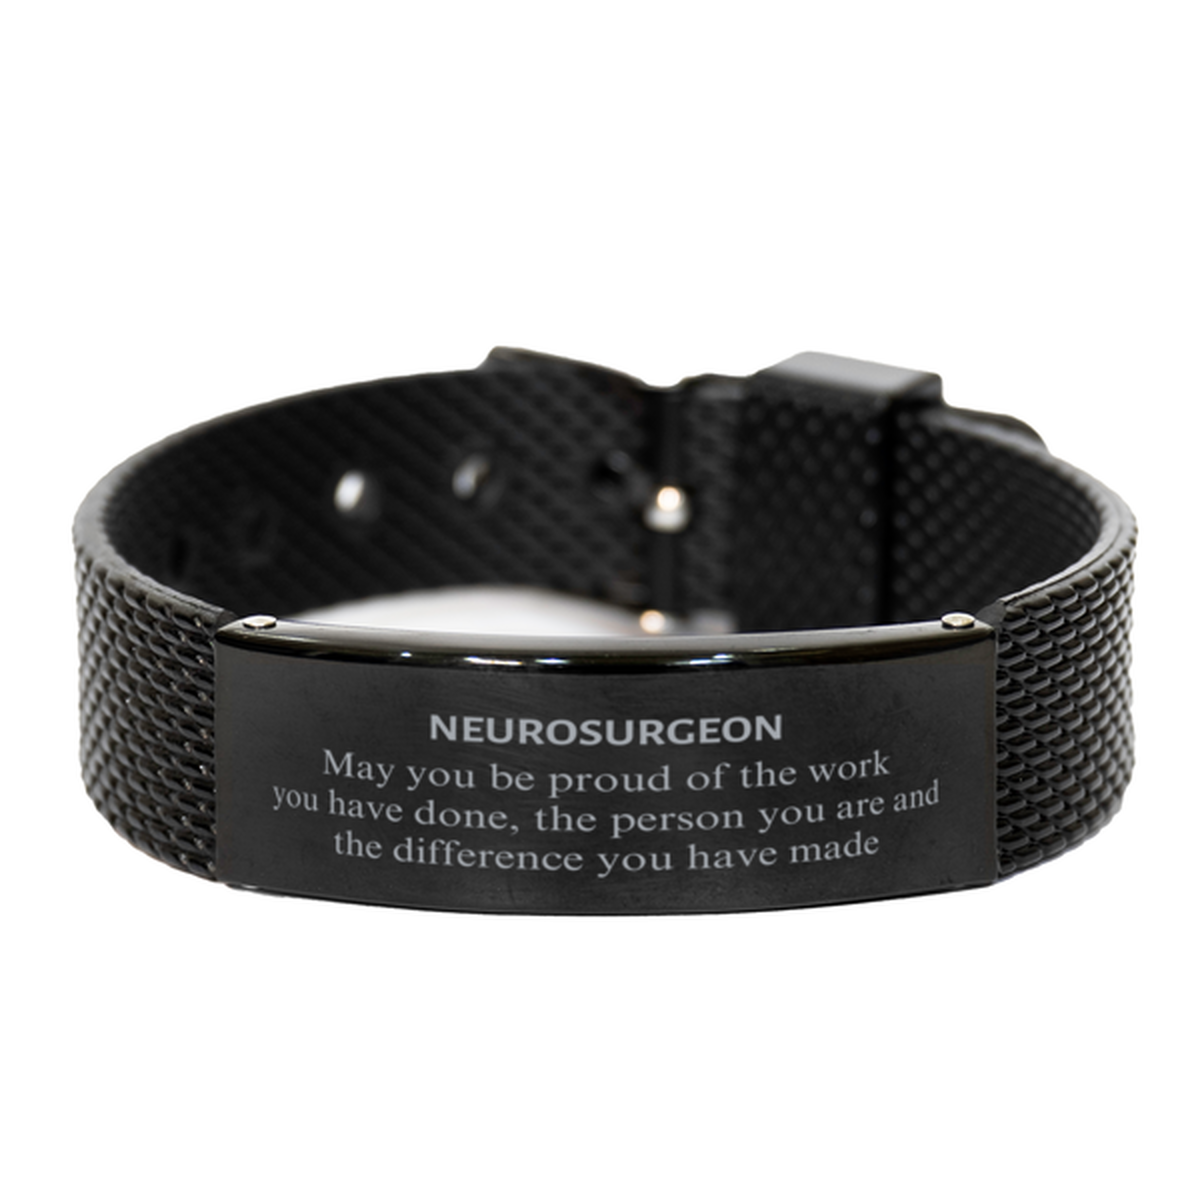 Neurosurgeon May you be proud of the work you have done, Retirement Neurosurgeon Black Shark Mesh Bracelet for Colleague Appreciation Gifts Amazing for Neurosurgeon